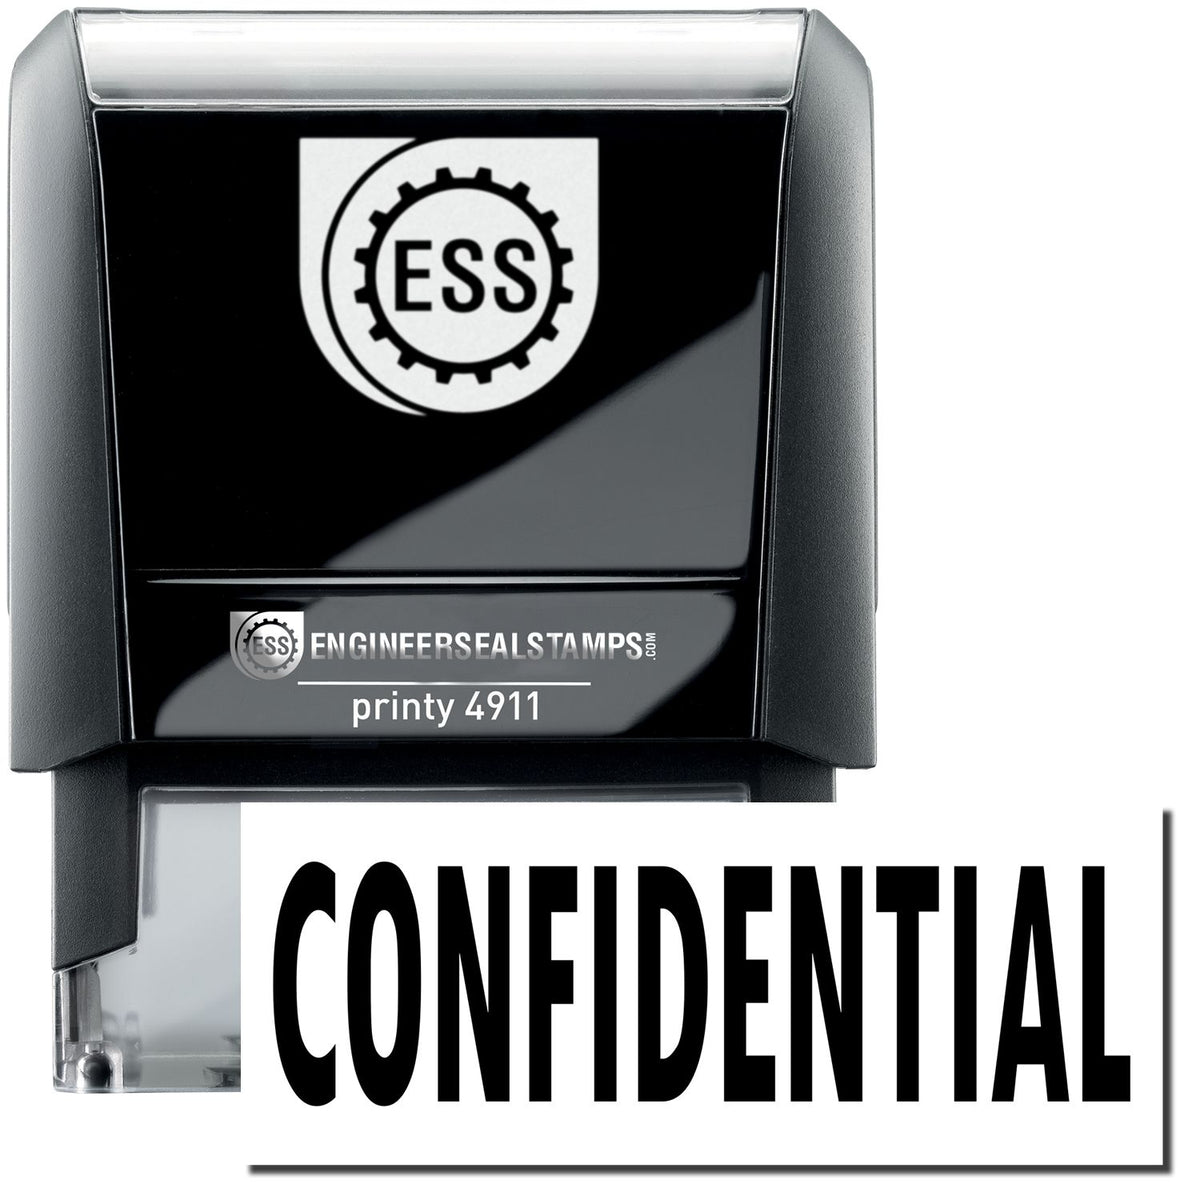 A self-inking stamp with a stamped image showing how the text &quot;CONFIDENTIAL&quot; is displayed after stamping.